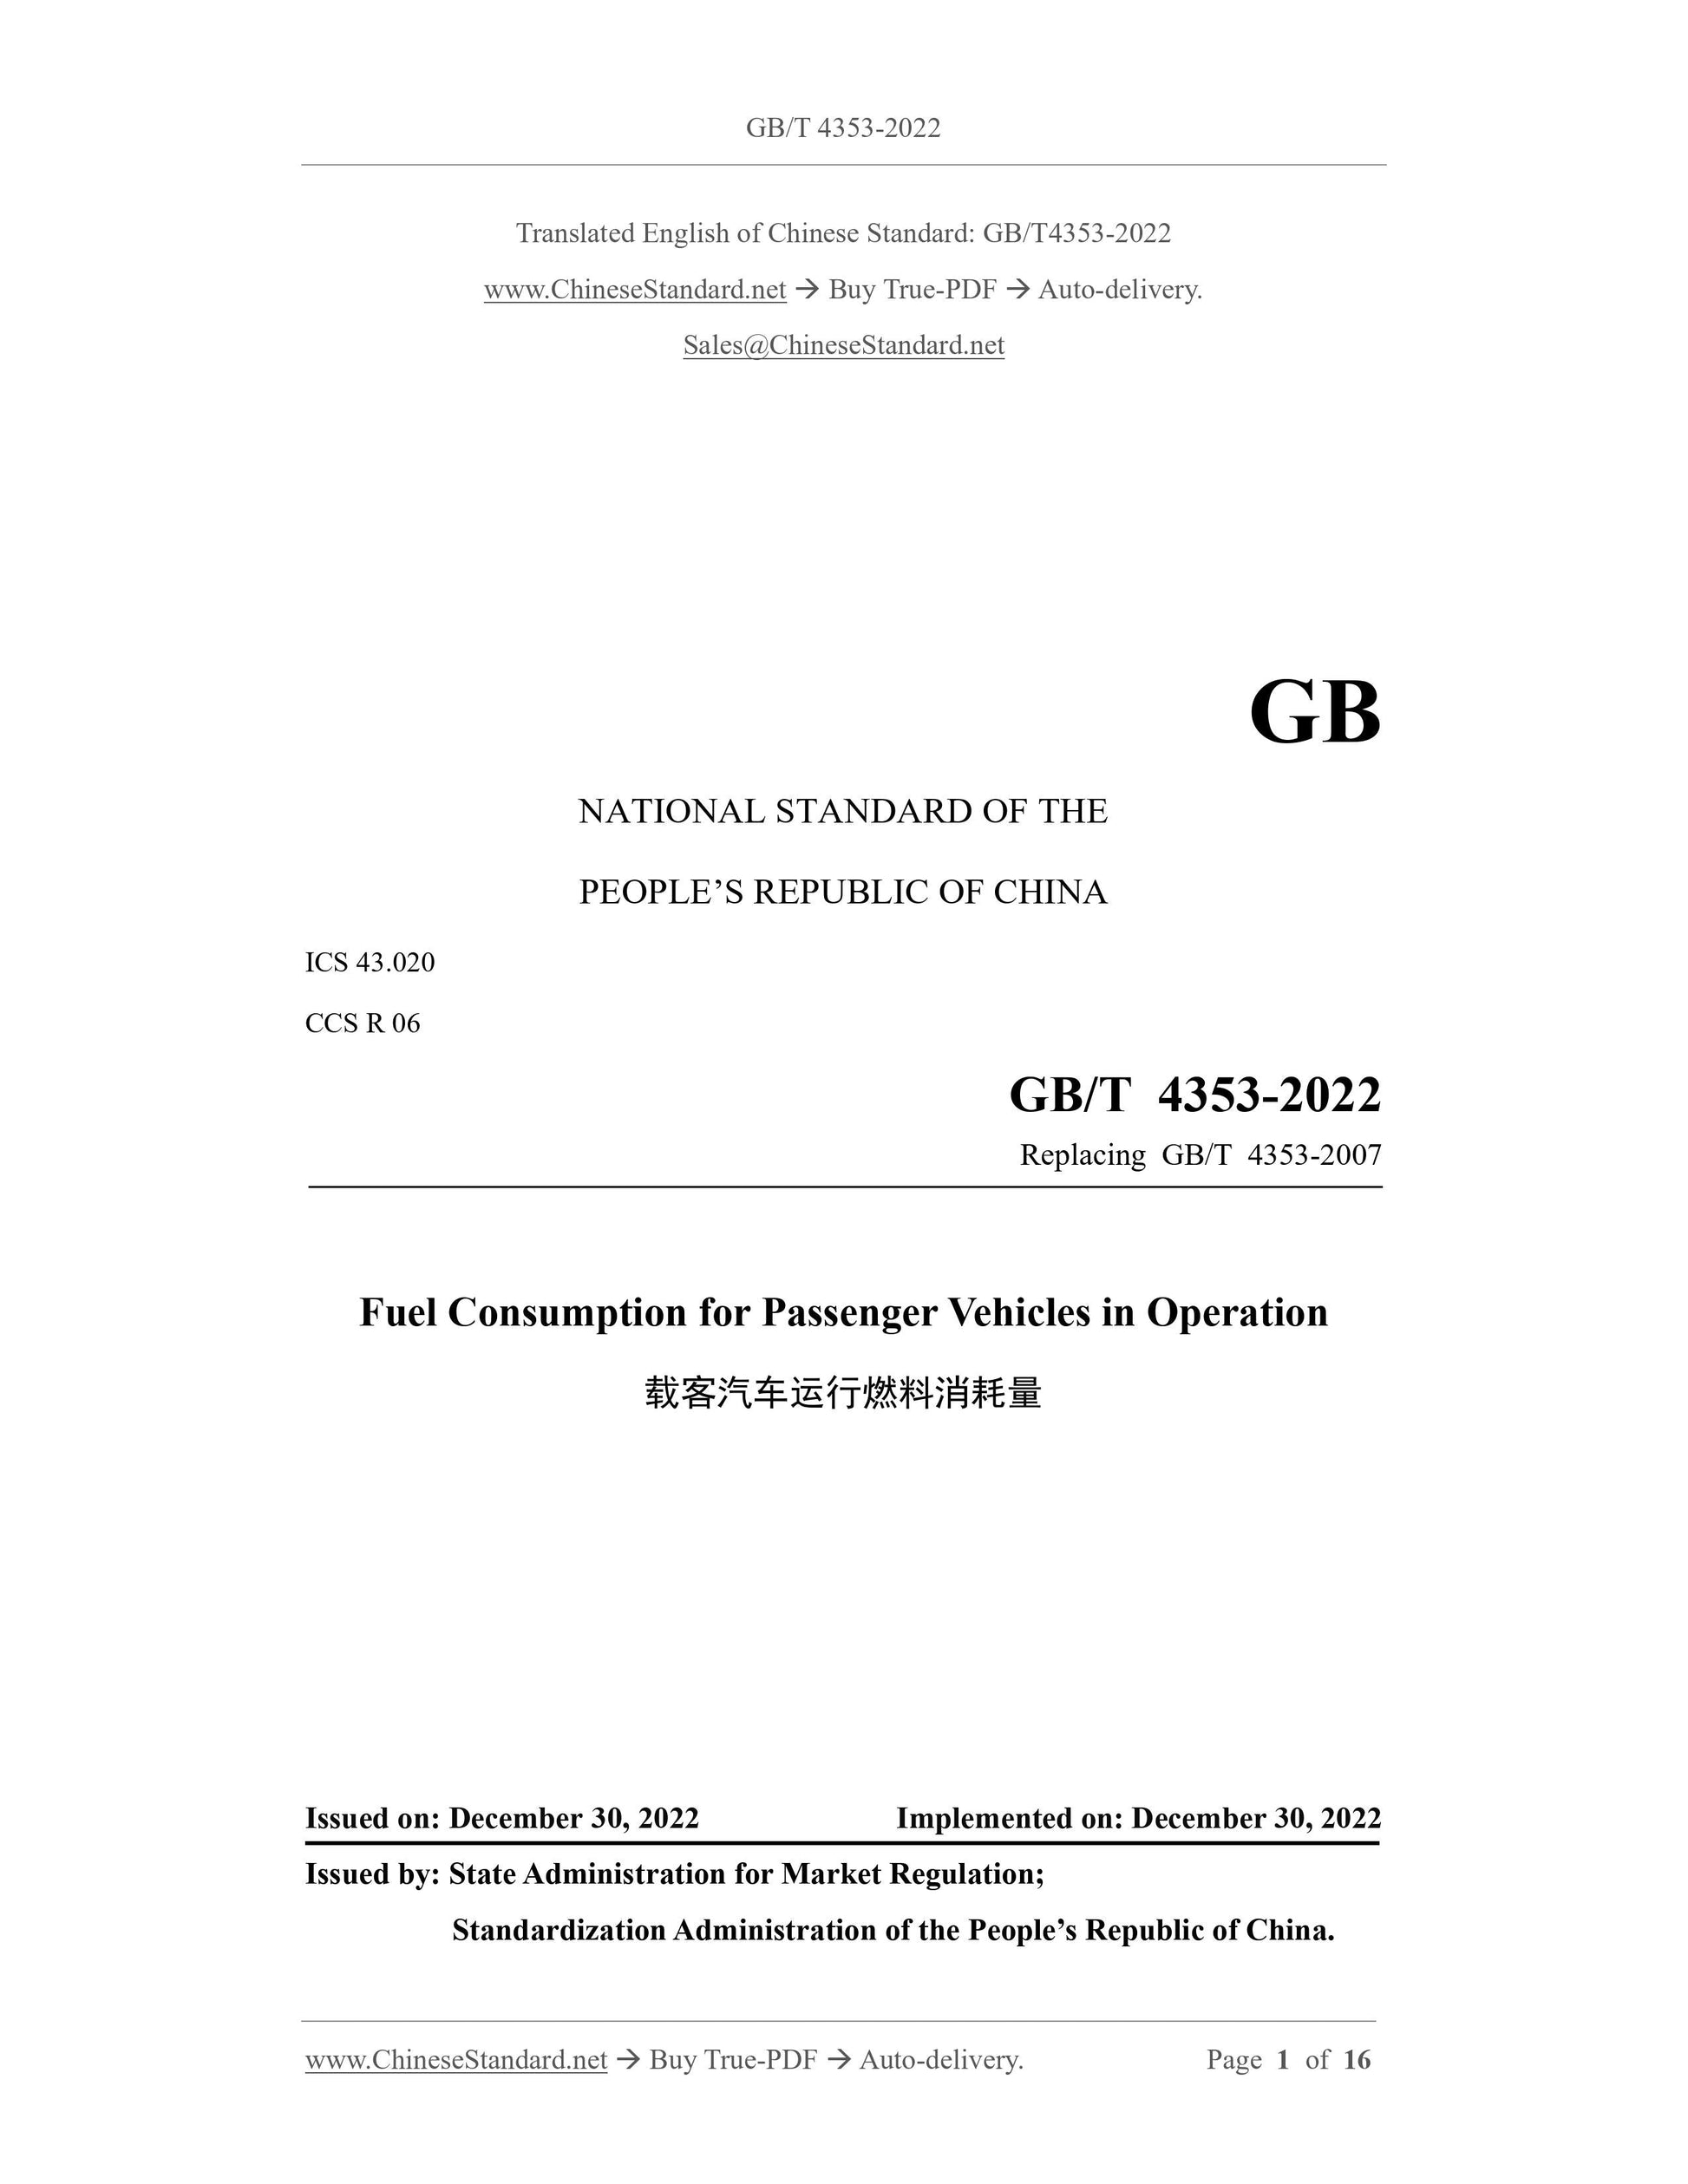 GB/T 4353-2022 Page 1